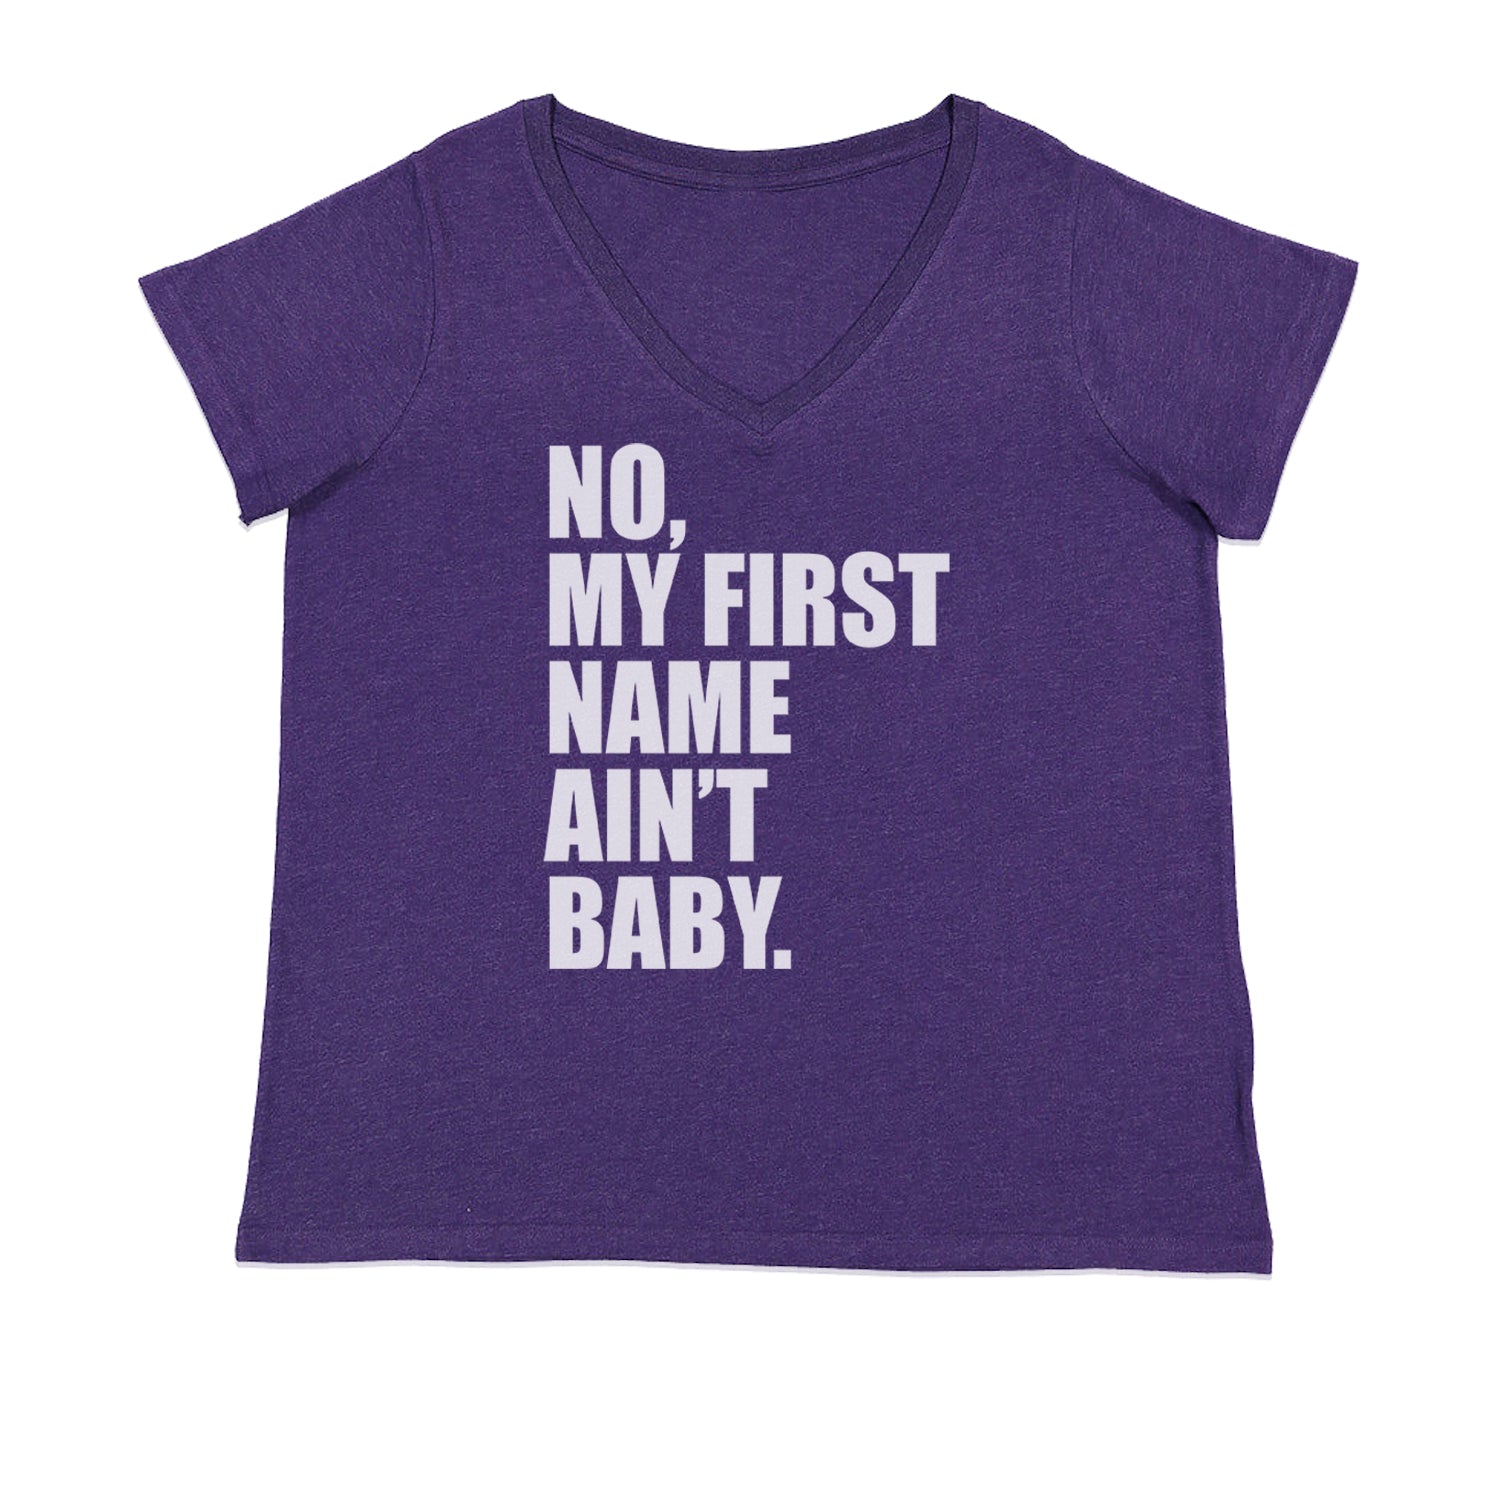 No My First Name Ain't Baby Together Again Ladies V-Neck T-shirt Purple